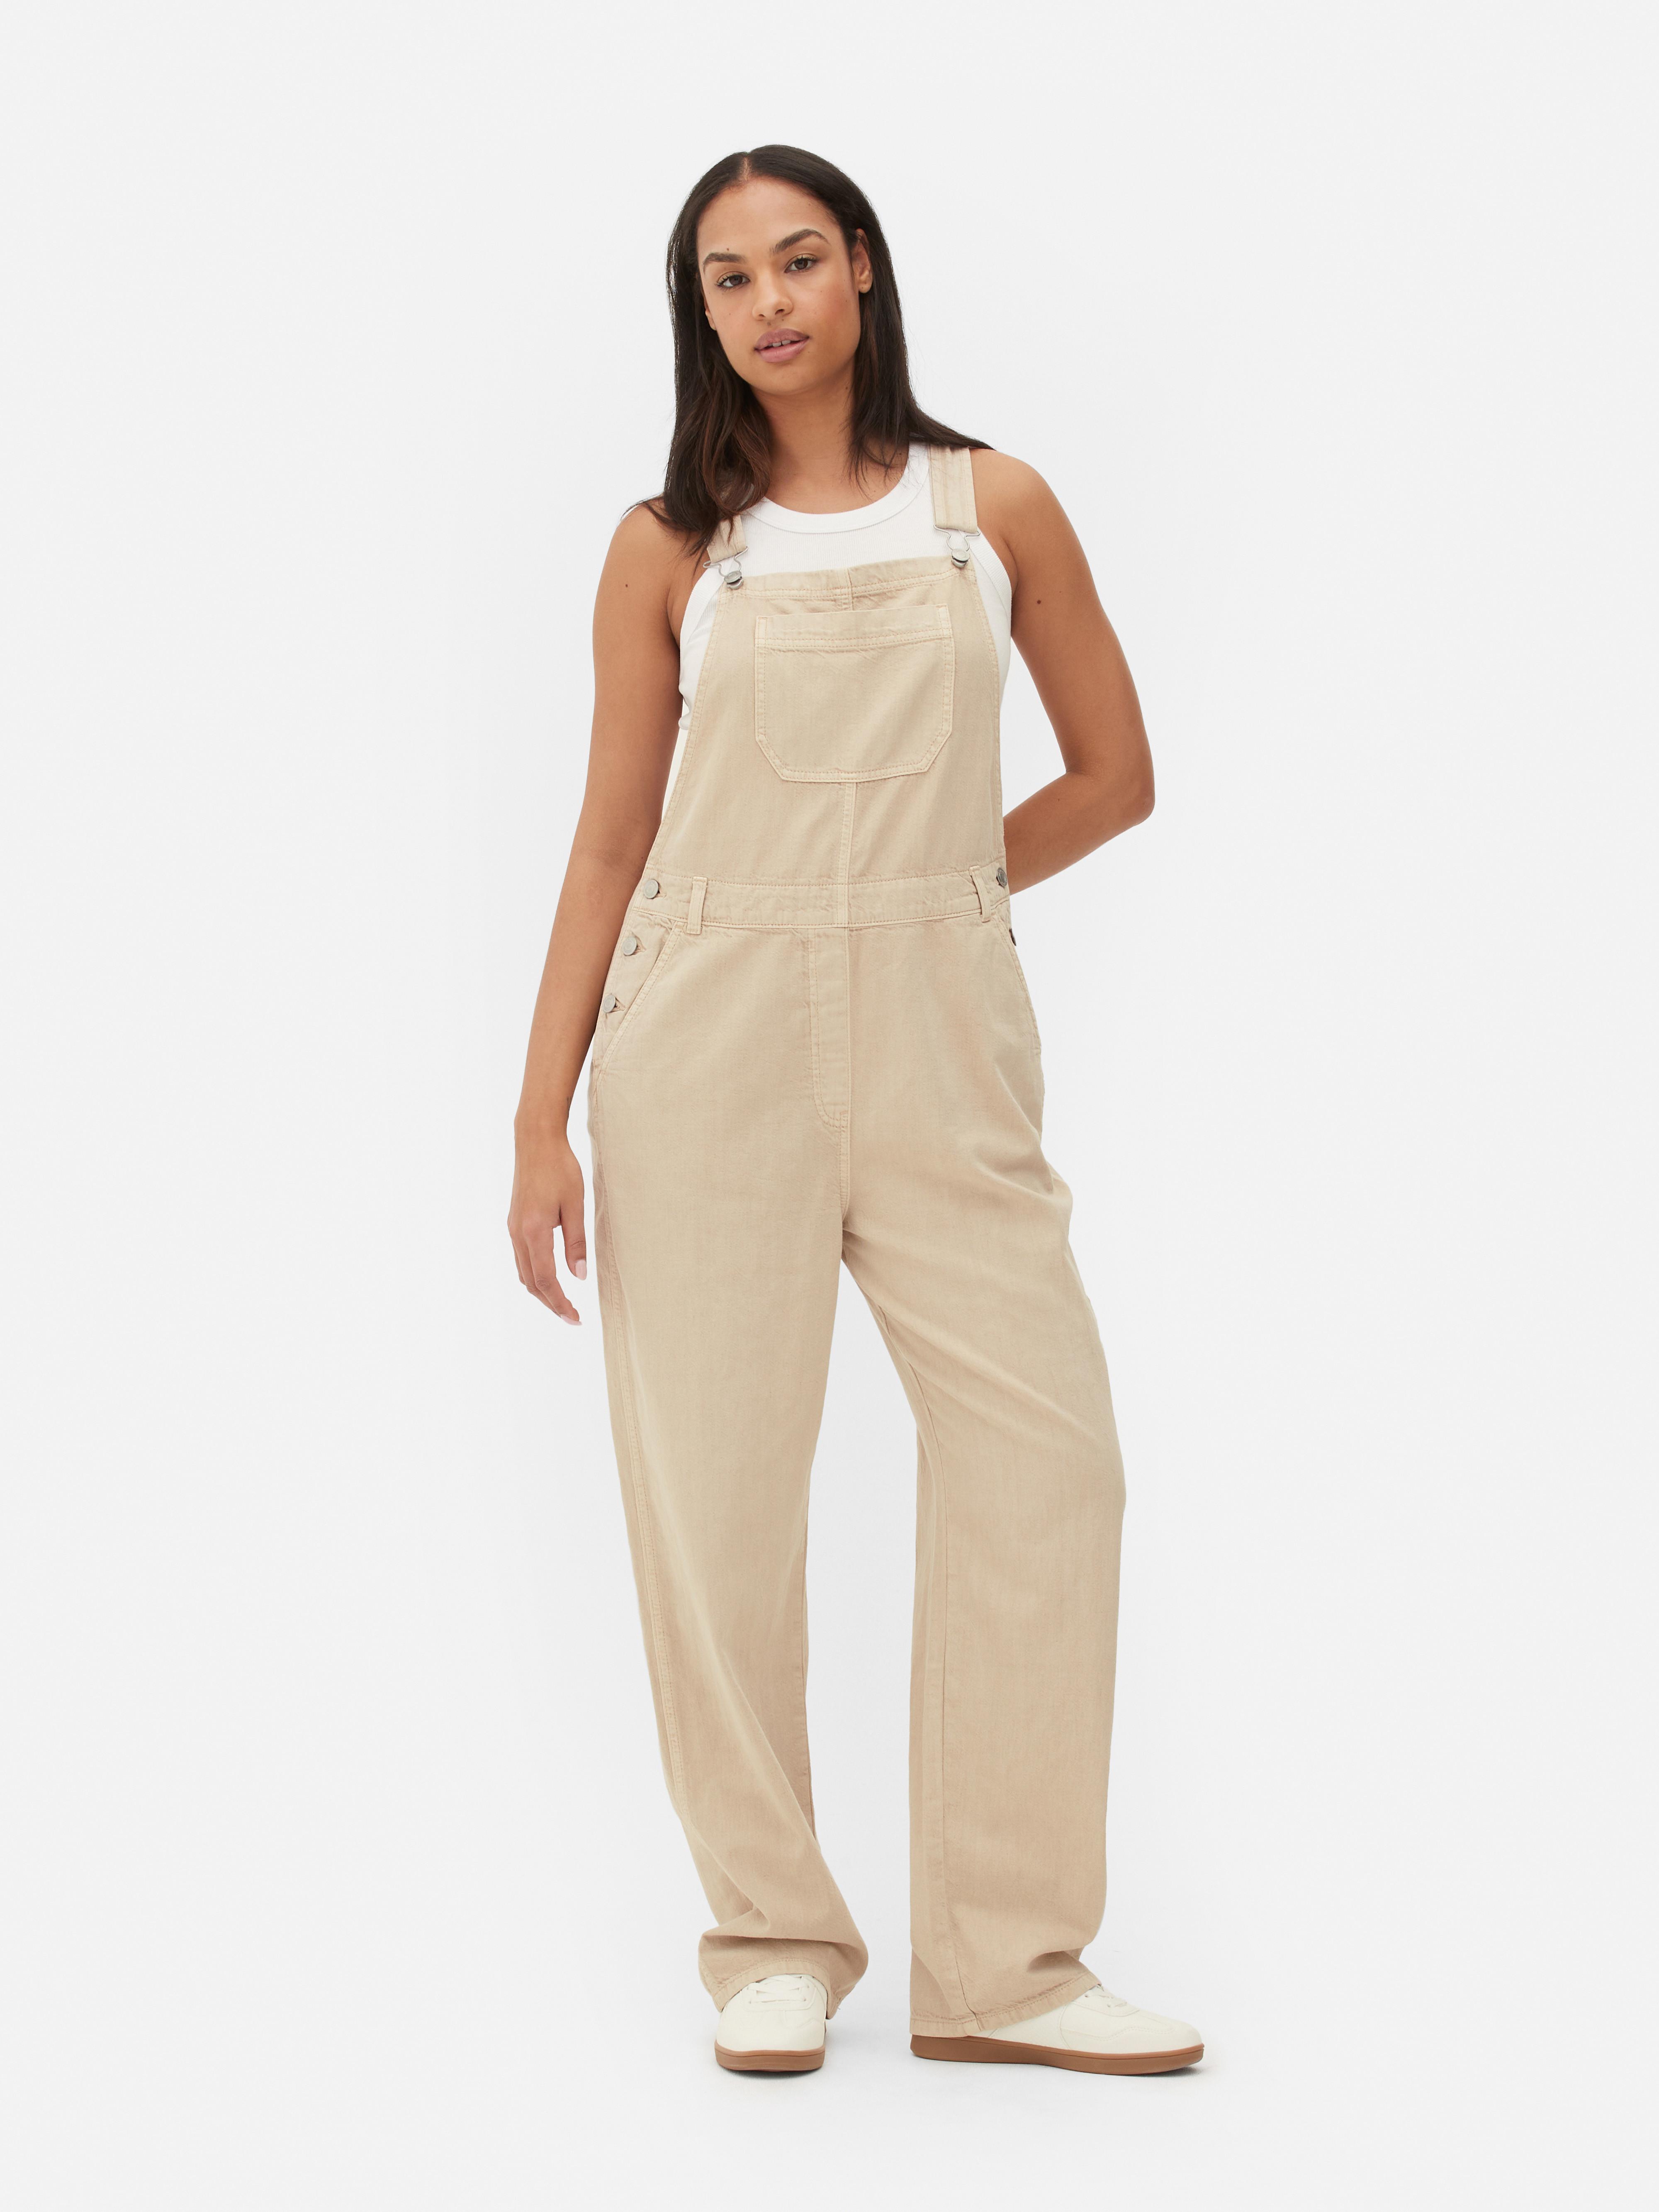 MOLAN Womens High Waist Fashion Overalls Loose Fit Streetwear Ladies Cargo  Trousers Primark For Casual And Stylish Females From Fourforme, $20.03